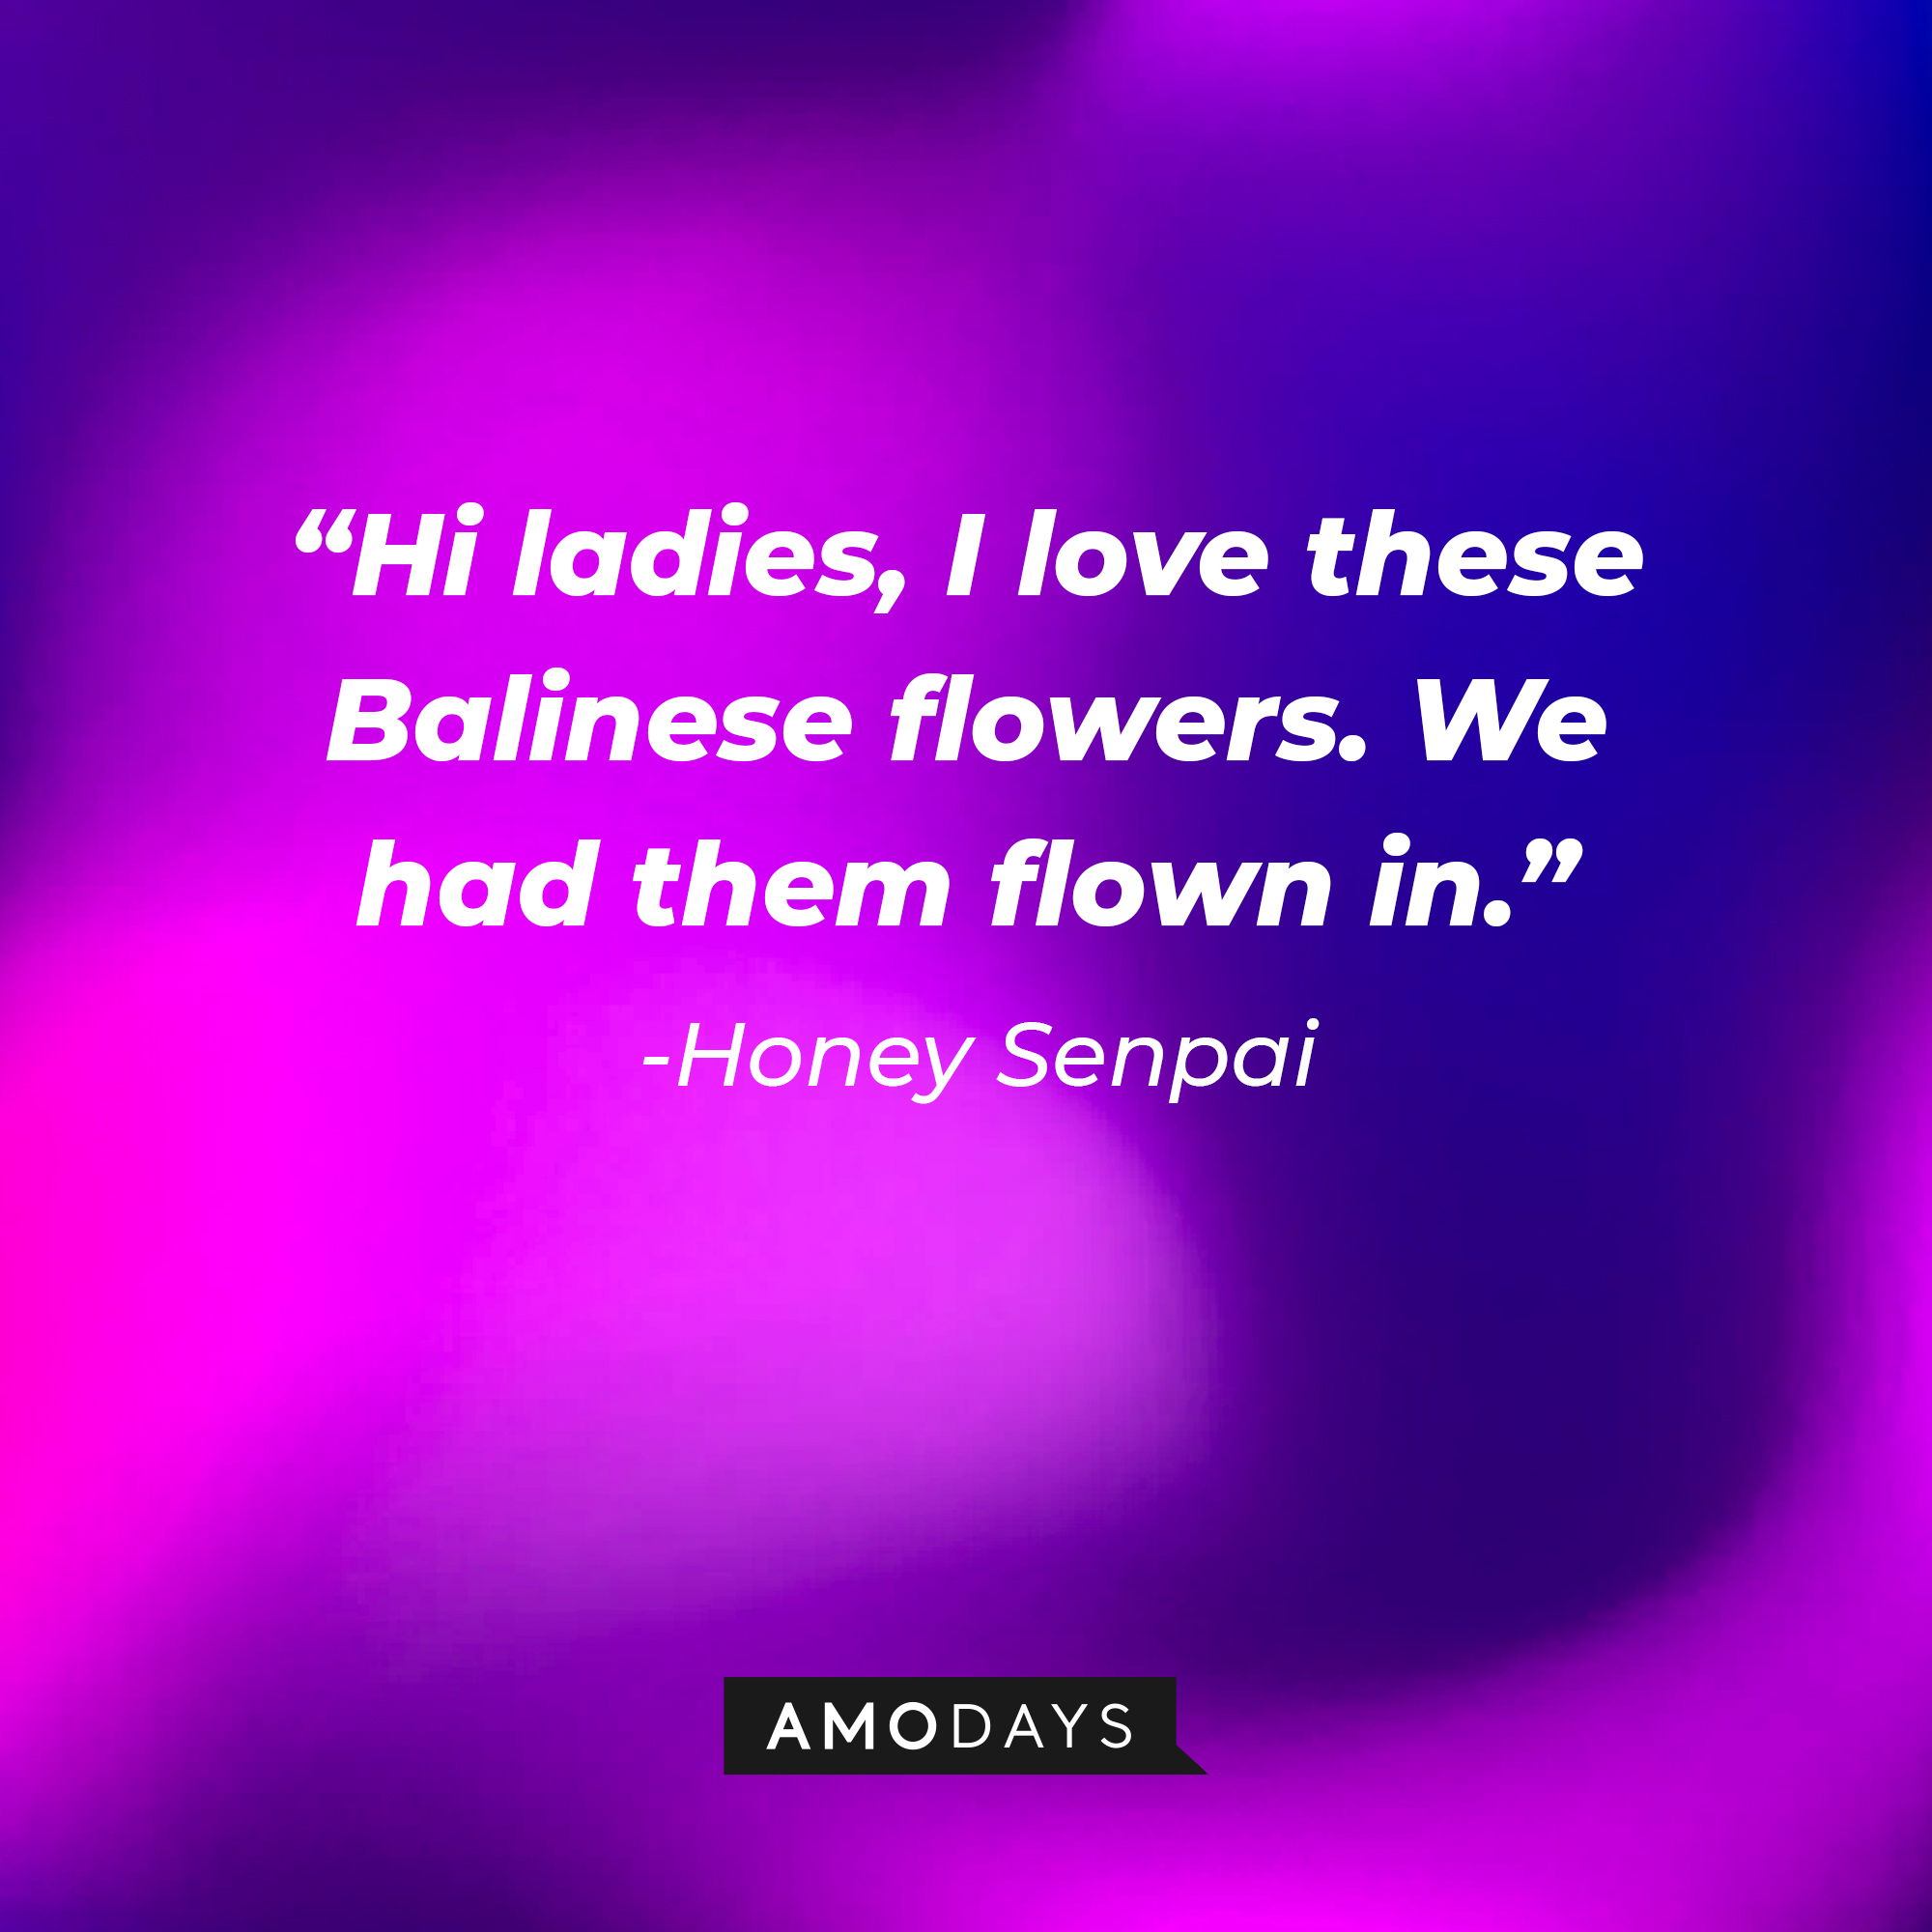 Honey Senpai’s quote: “Hi ladies, I love these Balinese flowers. We had them flown in.” | Source: AmoDays